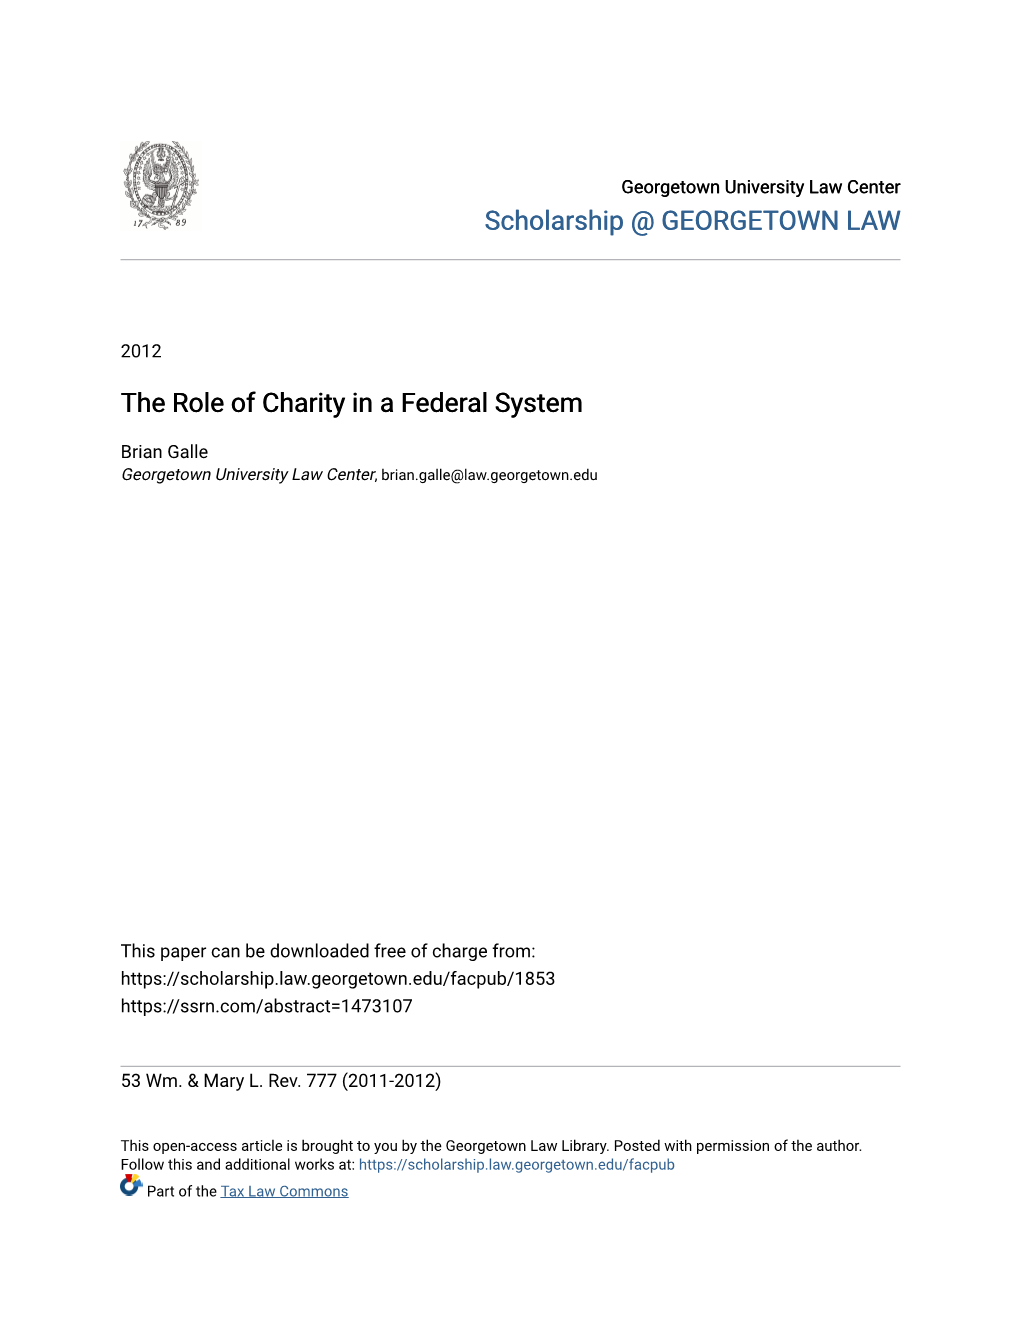 The Role of Charity in a Federal System